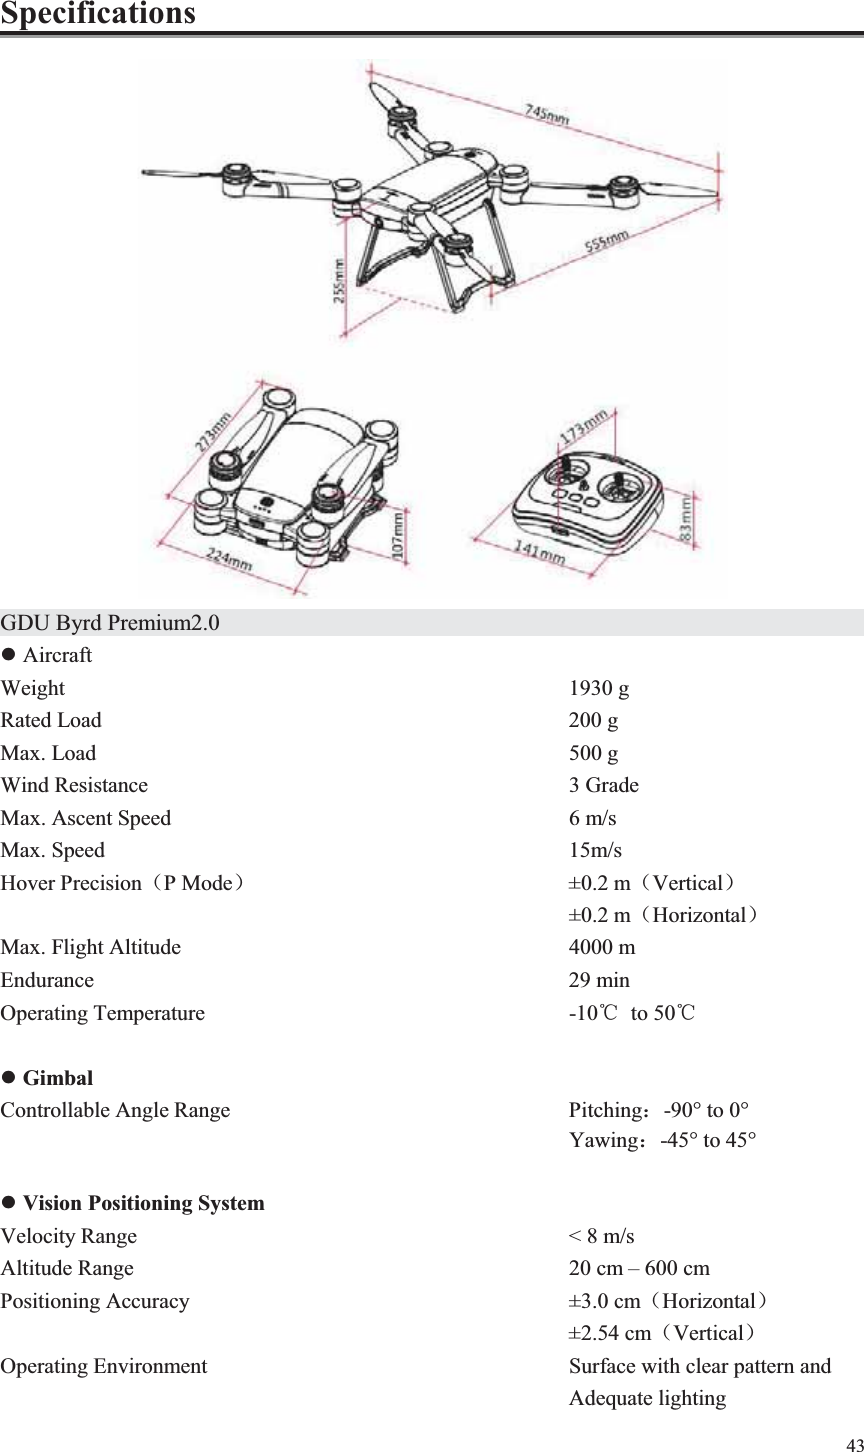 43  Specifications  GDU Byrd Premium2.0                  z Aircraft Weight             1930 g Rated Load           200 g Max. Load           500 g Wind Resistance          3 Grade Max. Ascent Speed          6 m/s Max. Speed           15m/s Hover Precision˄P Mode˅        ±0.2 m˄Vertical˅             ±0.2 m˄Horizontal˅ Max. Flight Altitude          4000 m Endurance                           29 min Operating Temperature         -10ć to 50ć  z Gimbal Controllable Angle Range        Pitching˖-90° to 0°   Yawing˖-45° to 45°  z Vision Positioning System Velocity Range          &lt; 8 m/s Altitude Range           20 cm – 600 cm Positioning Accuracy          ±3.0 cm˄Horizontal˅              ±2.54 cm˄Vertical˅ Operating Environment         Surface with clear pattern and               Adequate lighting 